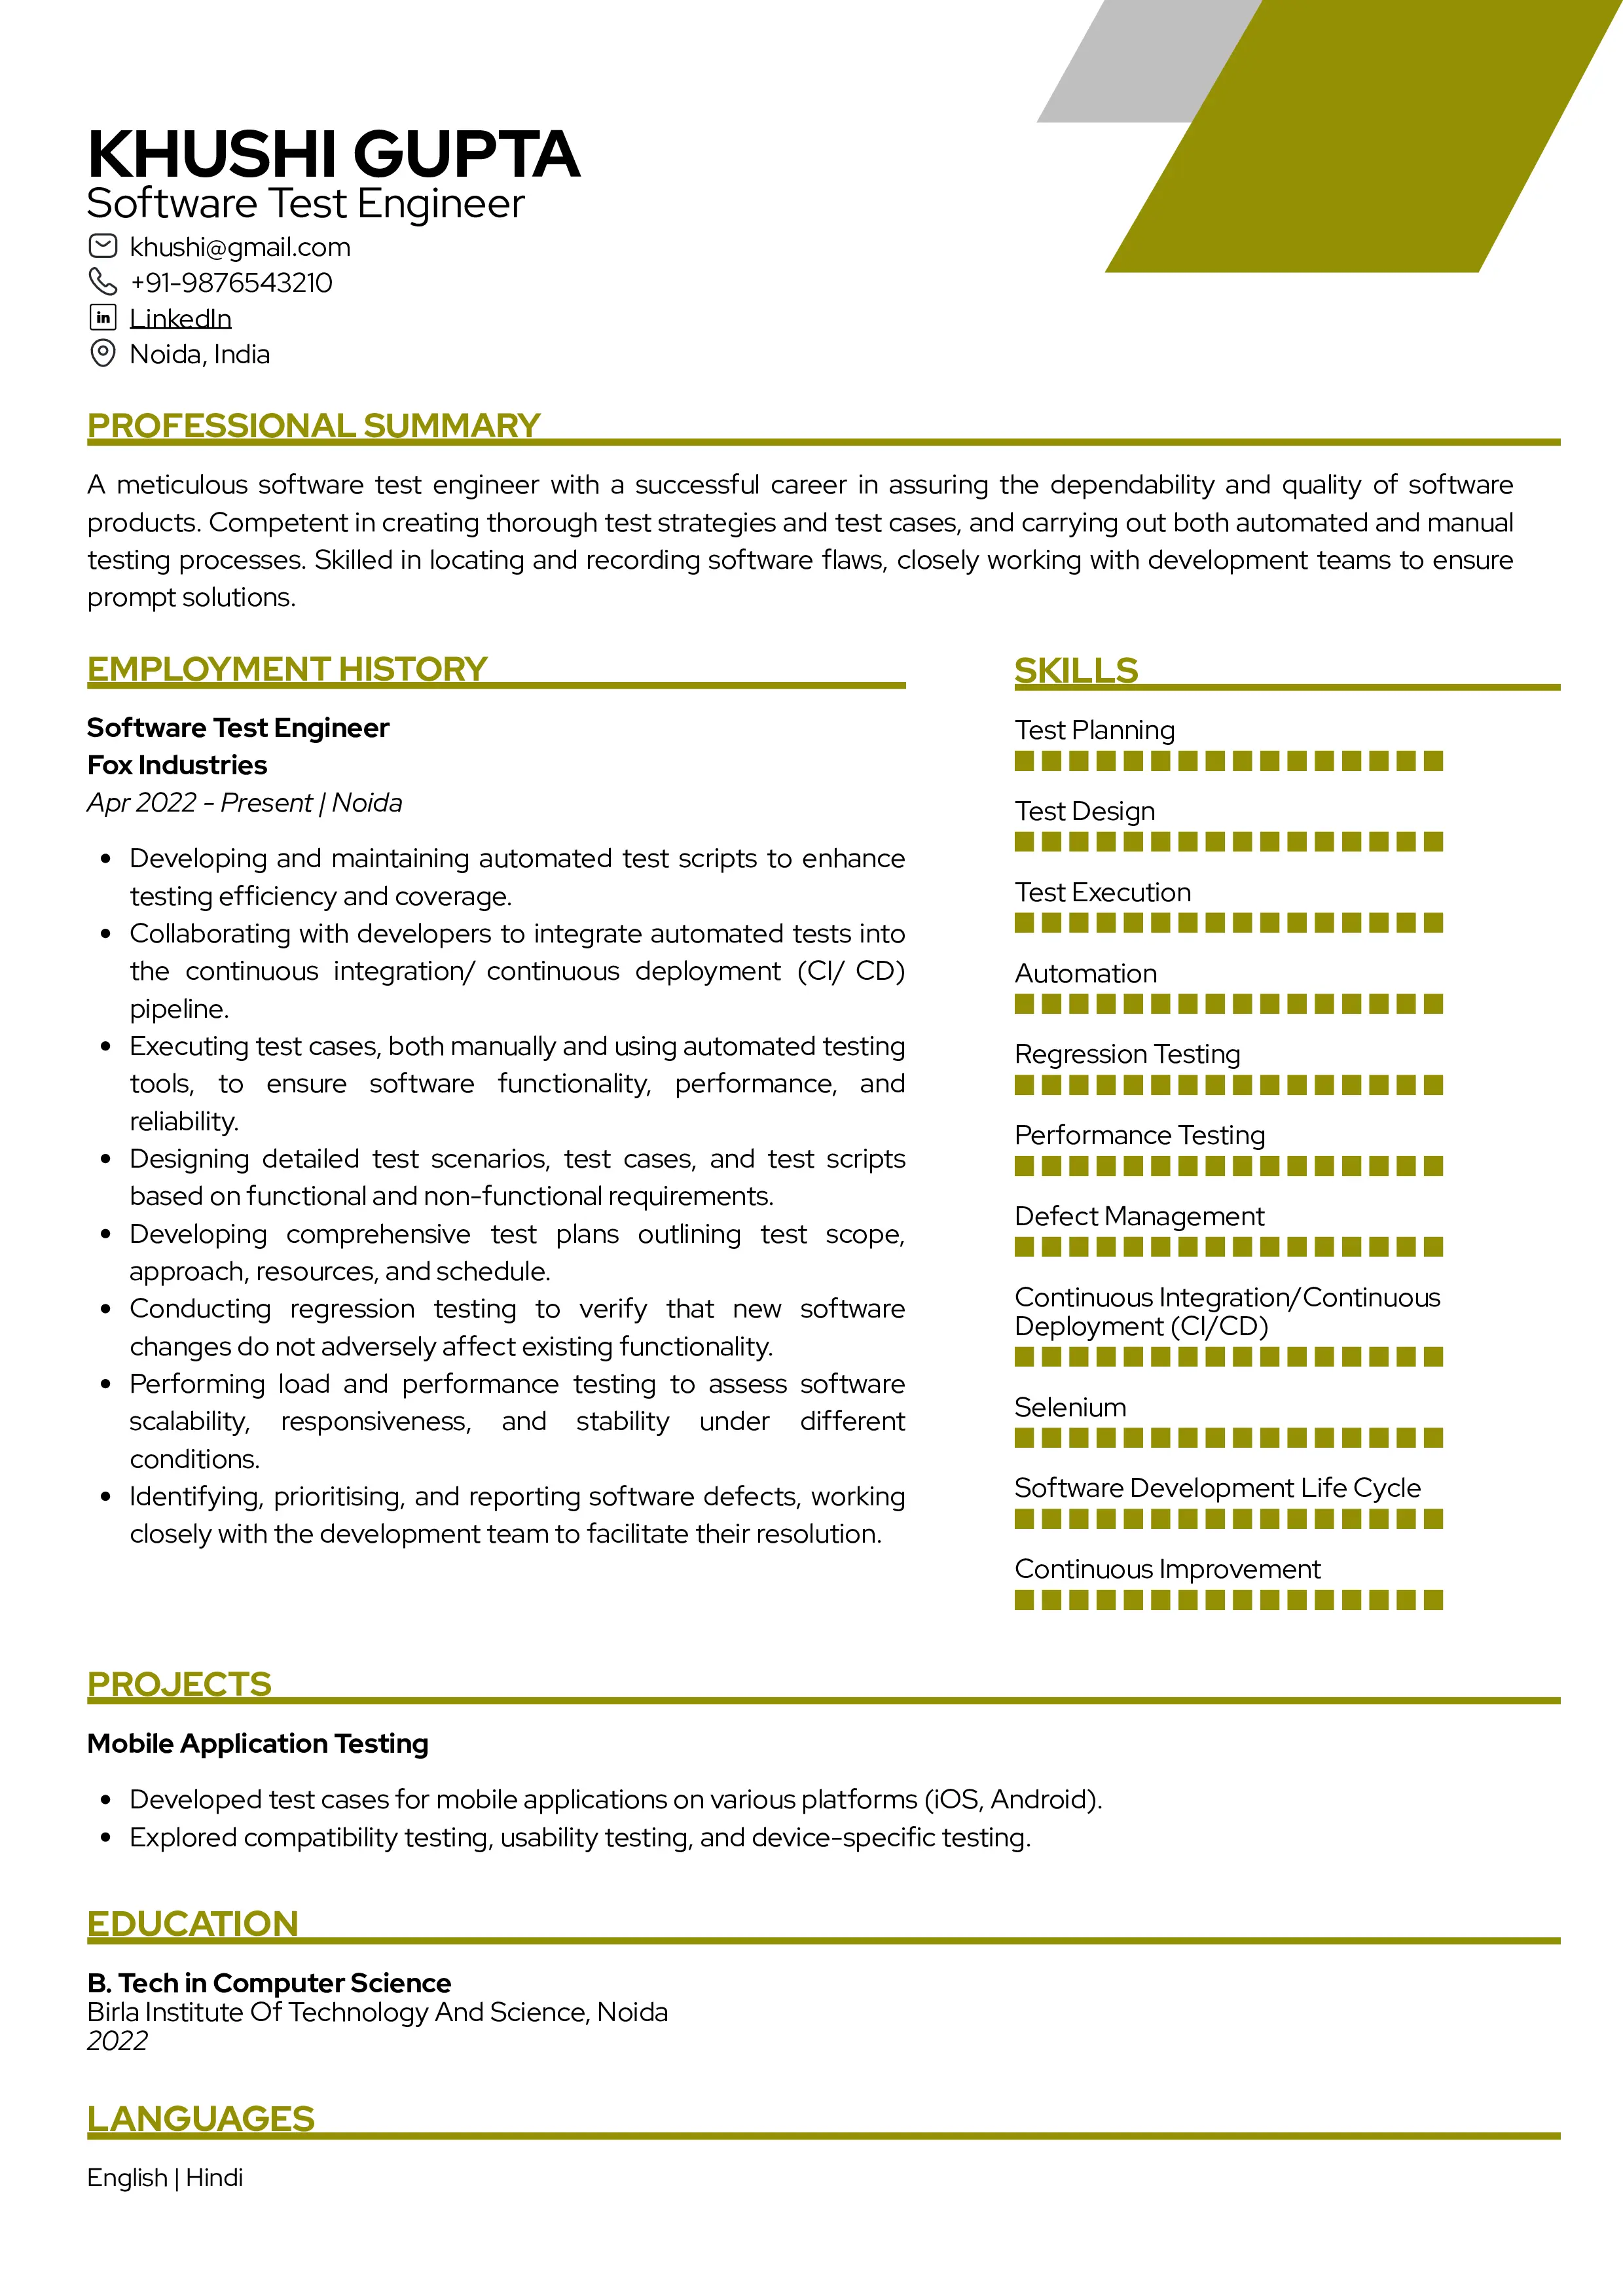 Sample Resume of Software Test Engineer | Free Resume Templates & Samples on Resumod.co